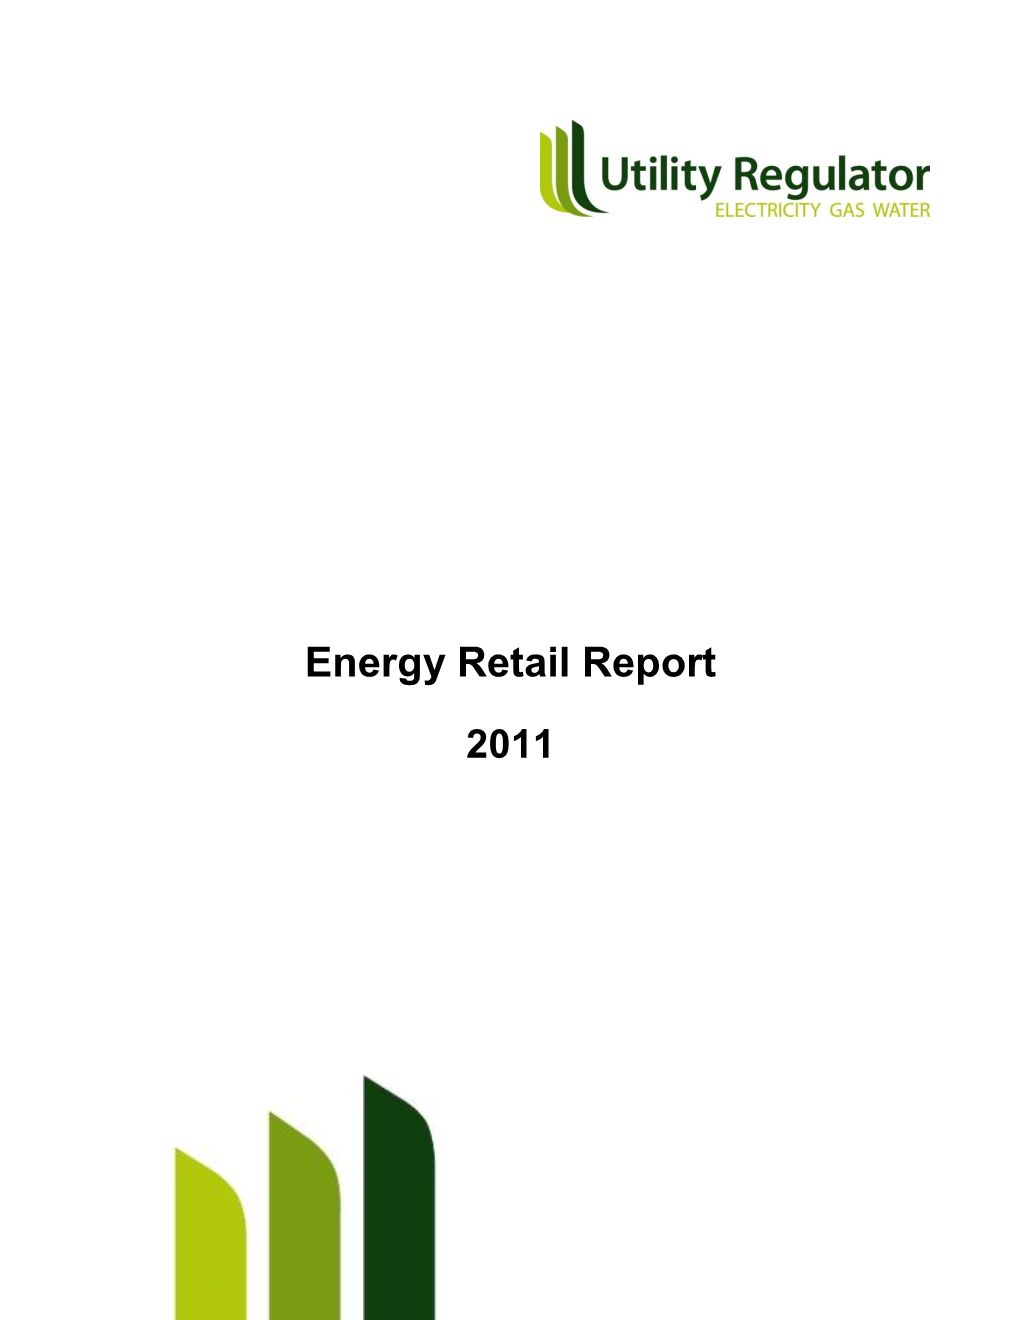 Annual Report 2011 (For 2010 Information)